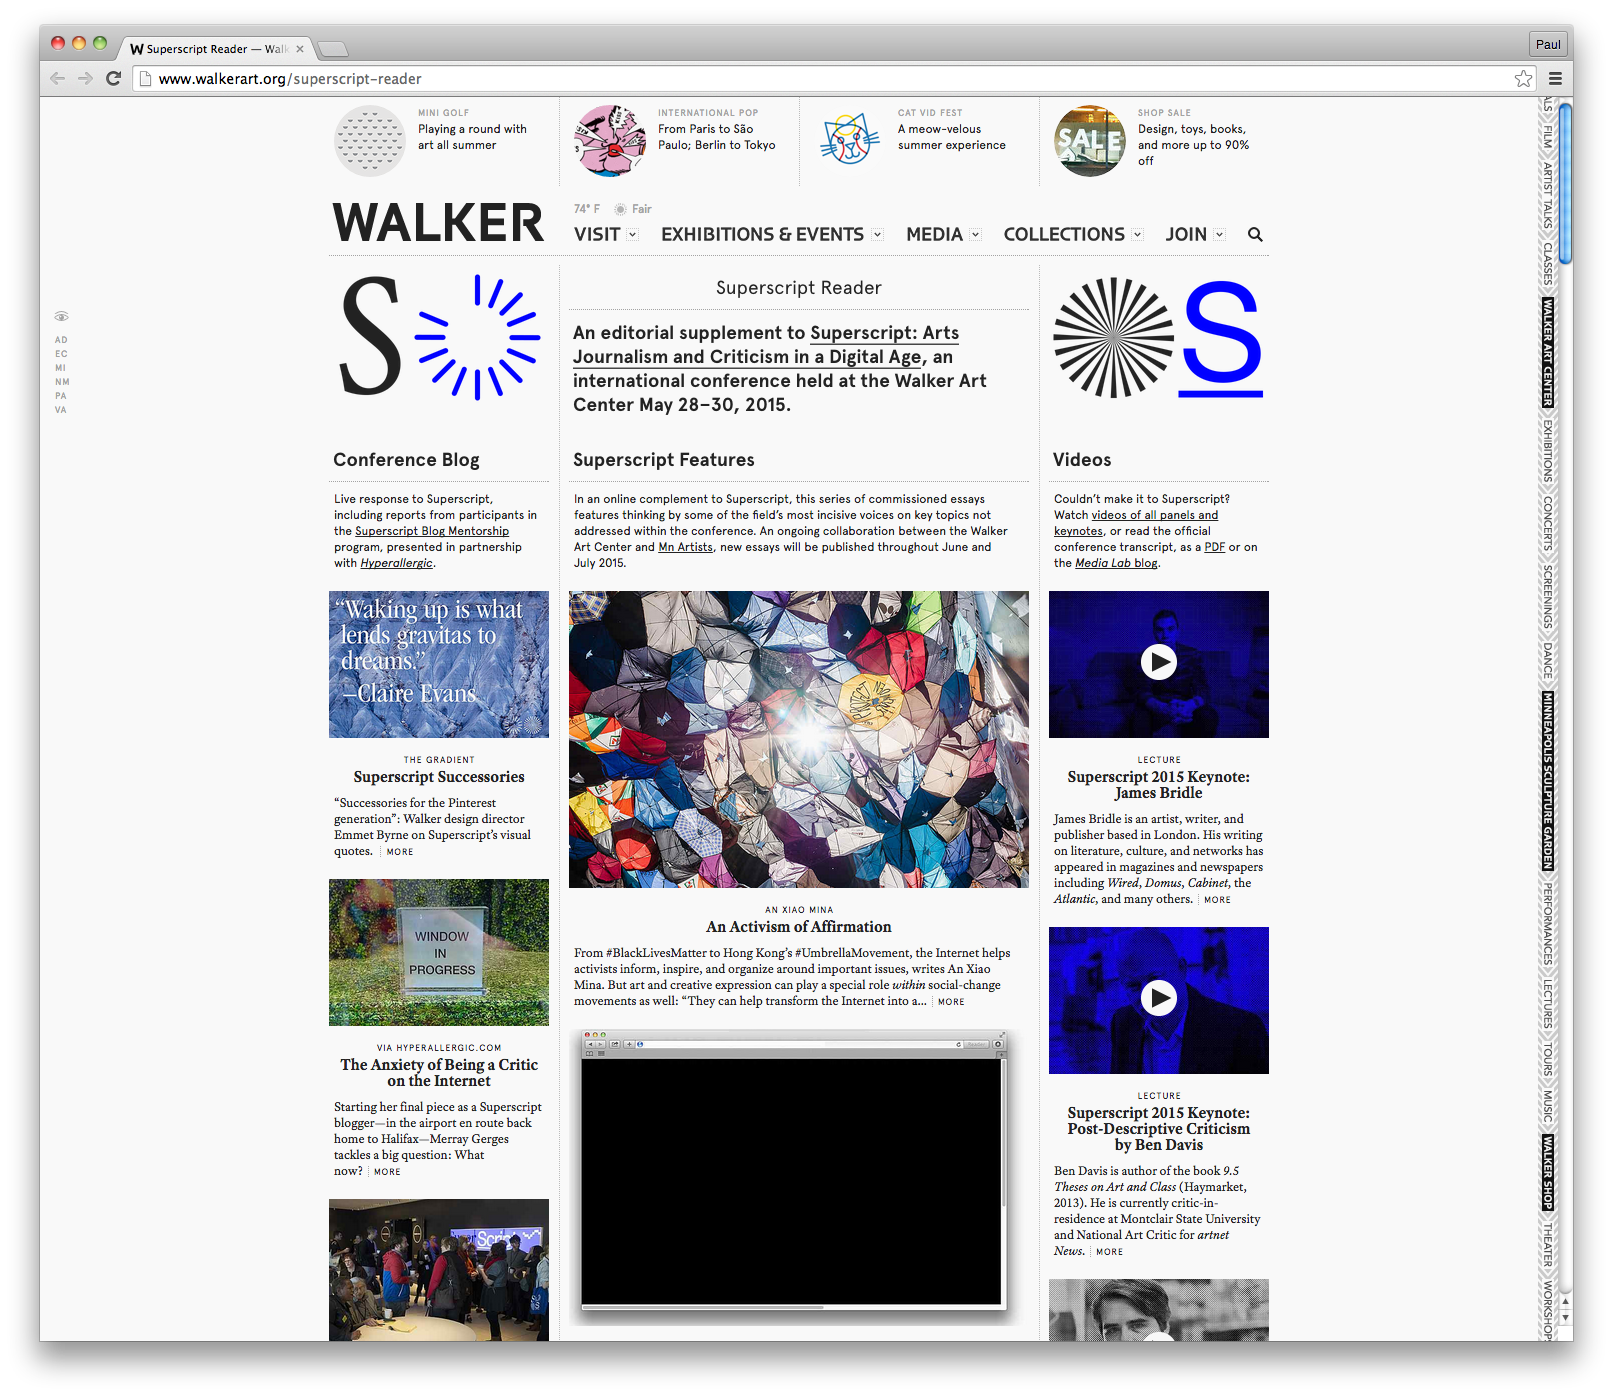  Superscript Reader, an online supplement to the in-person conference 